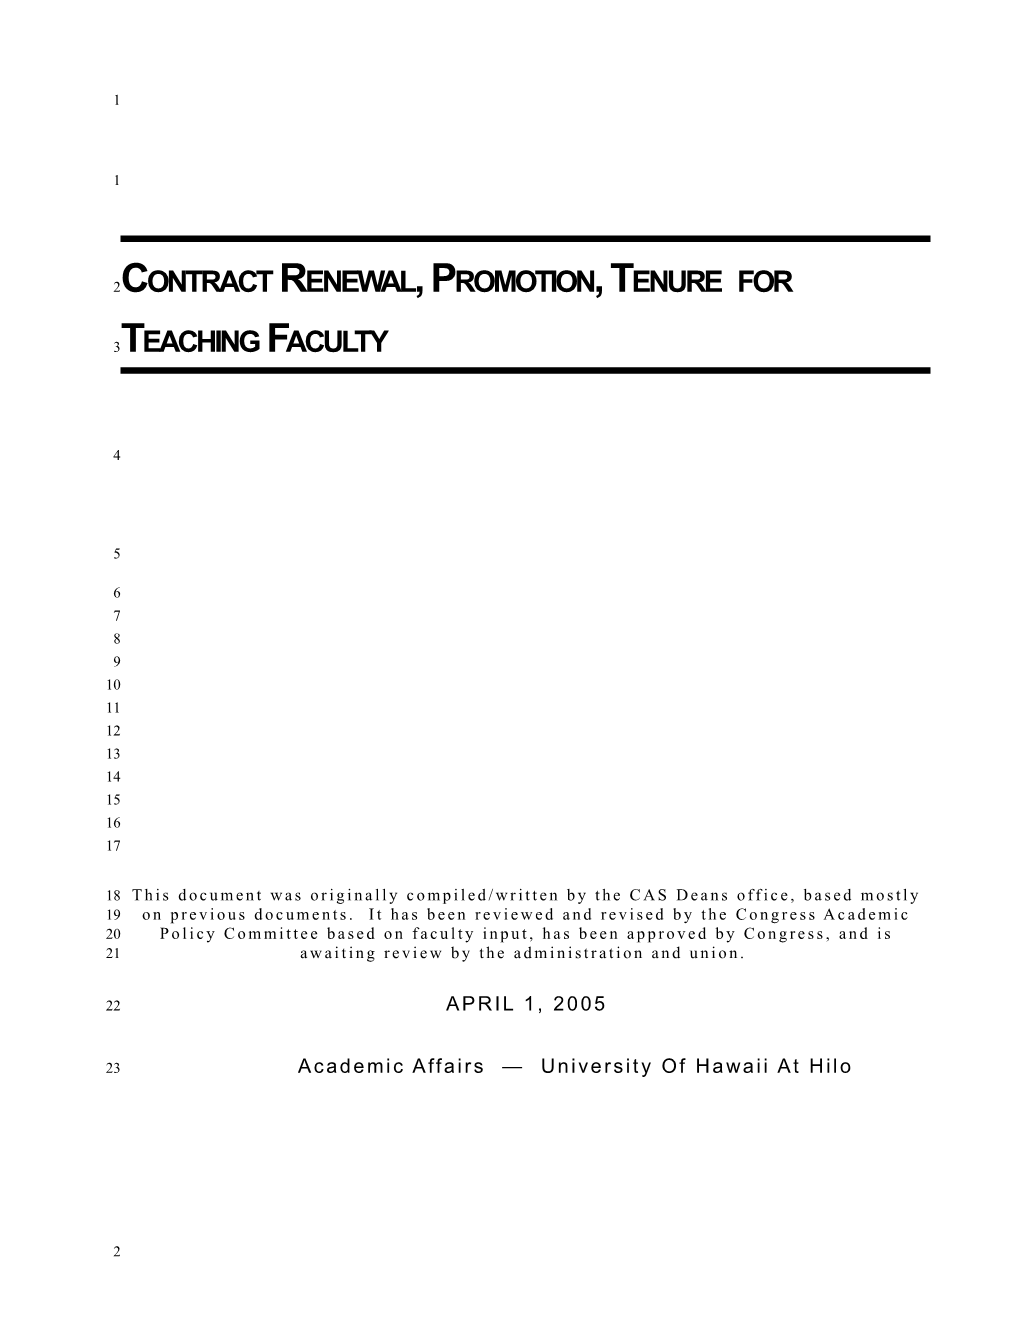 Contract Renewal, Promotion, and Tenure for Teaching Faculty